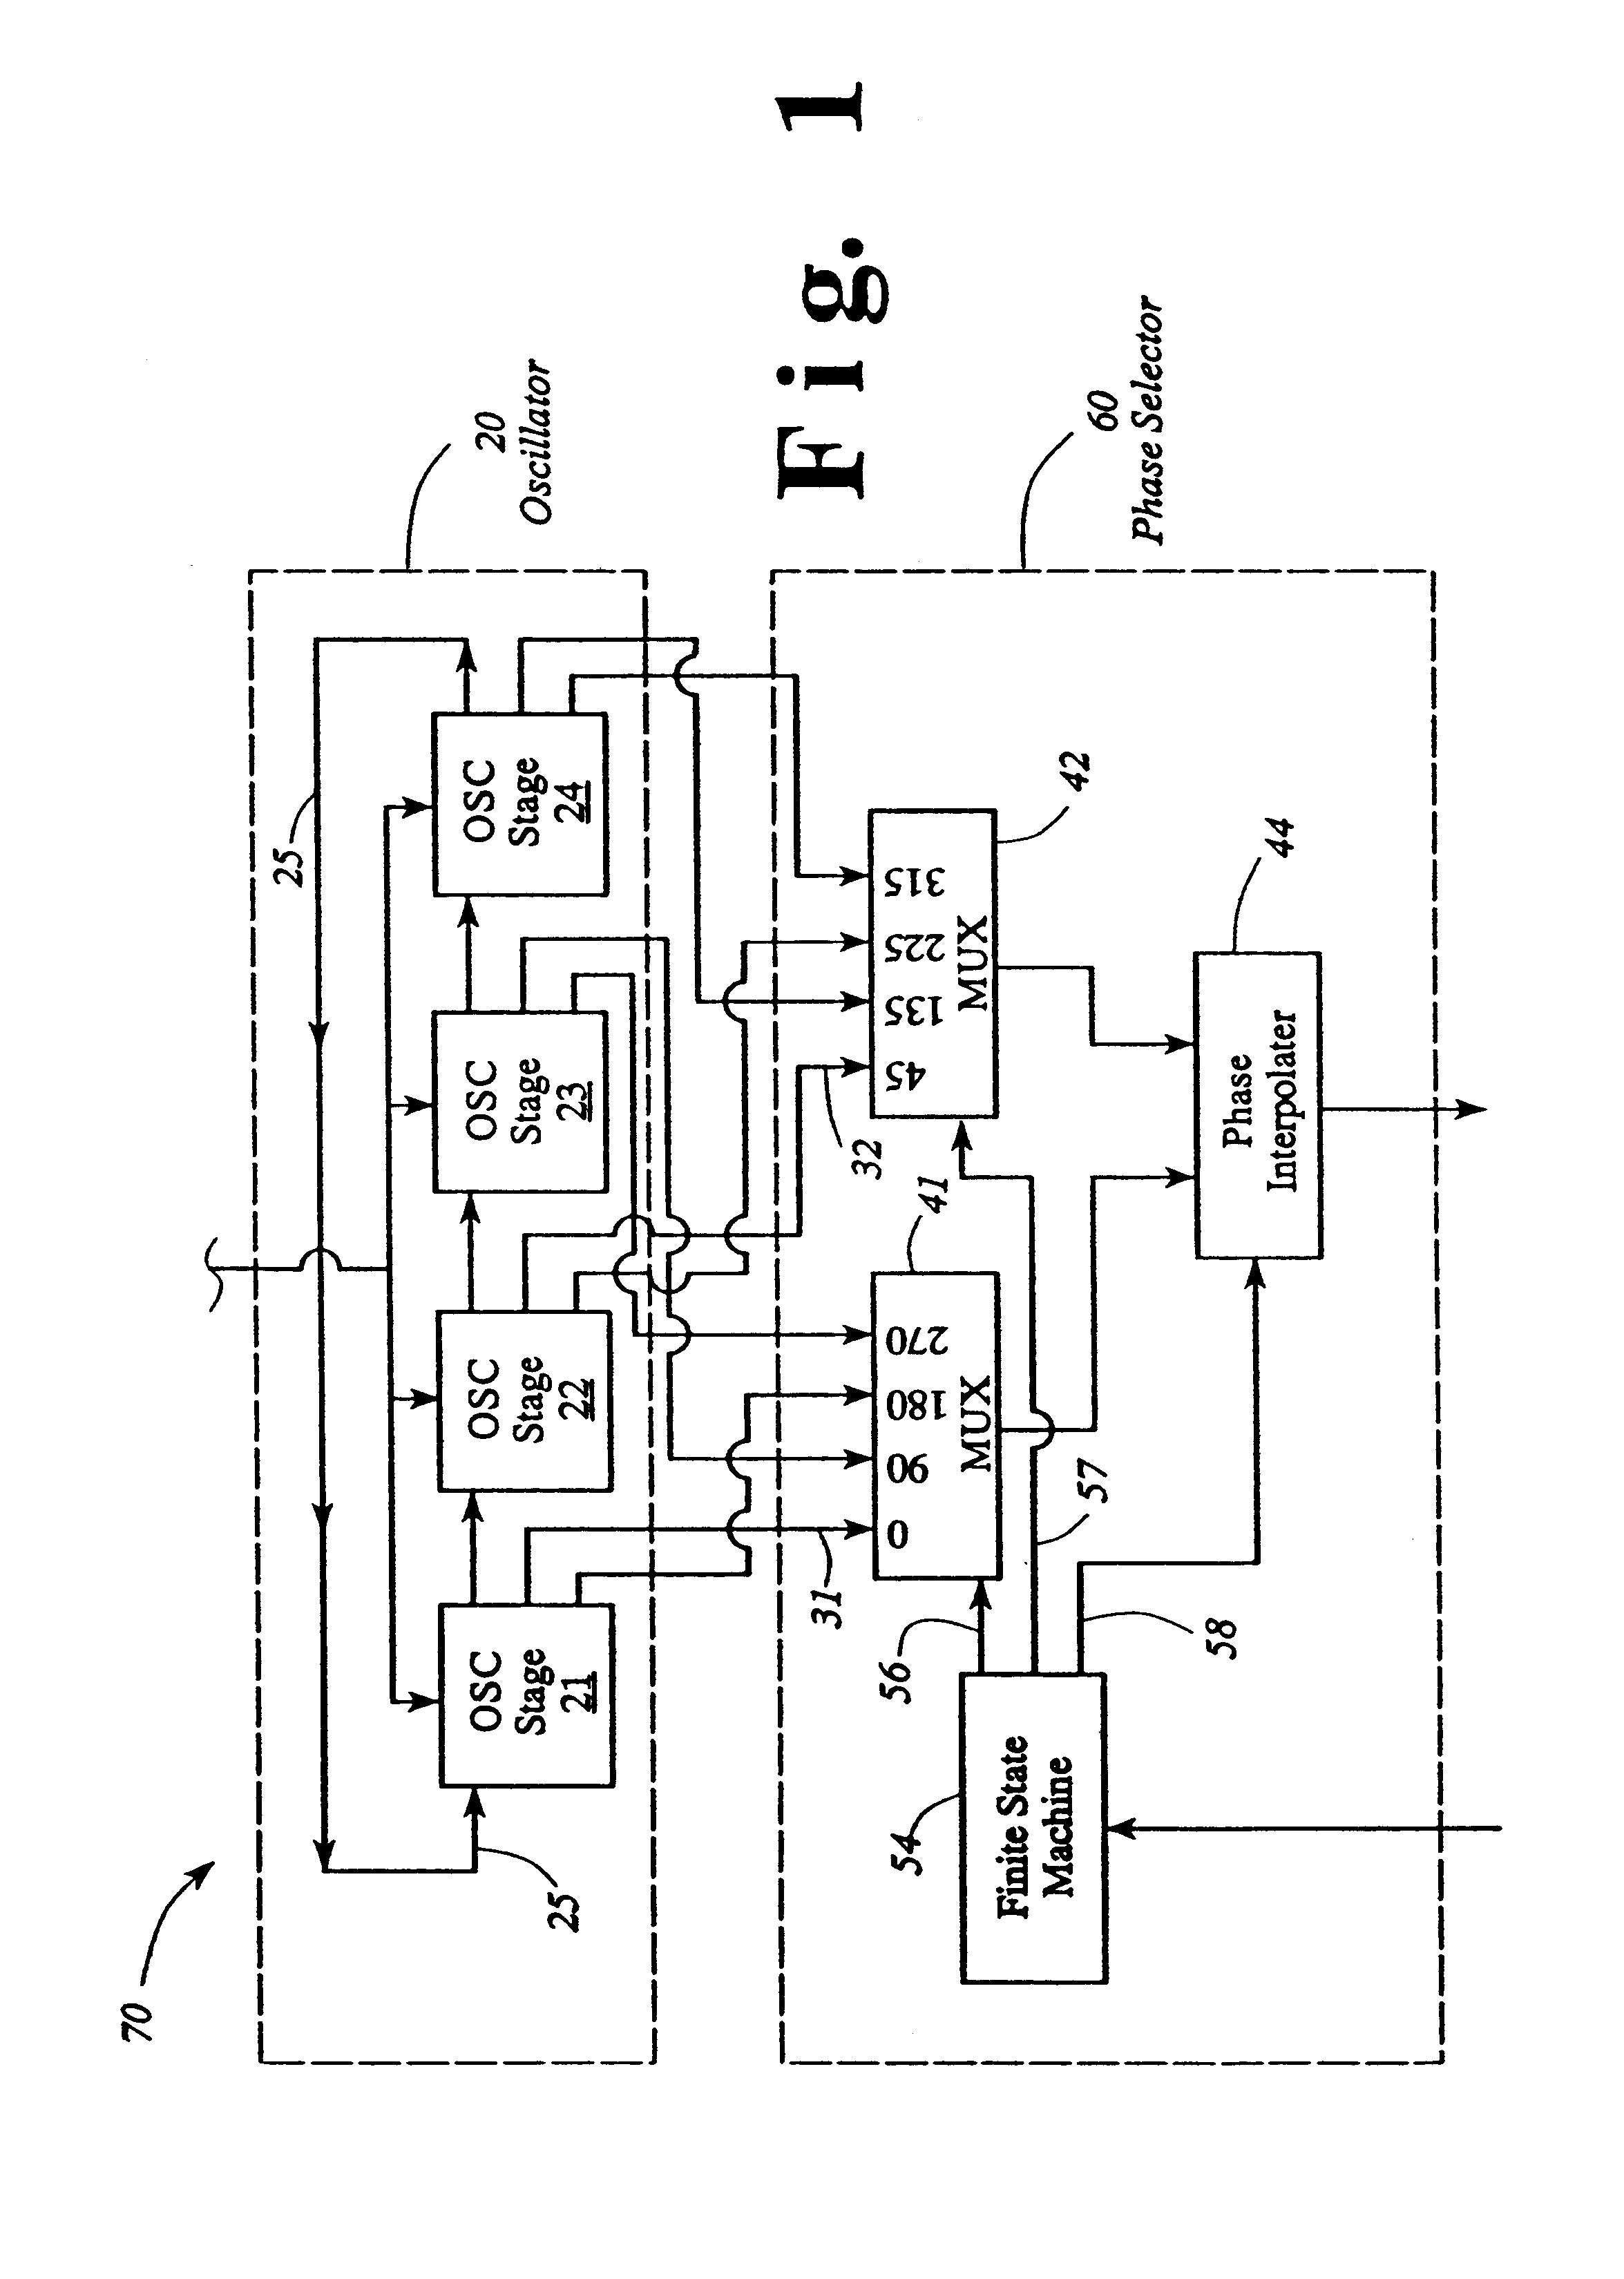 Oscillator with digitally variable phase for a phase-locked loop